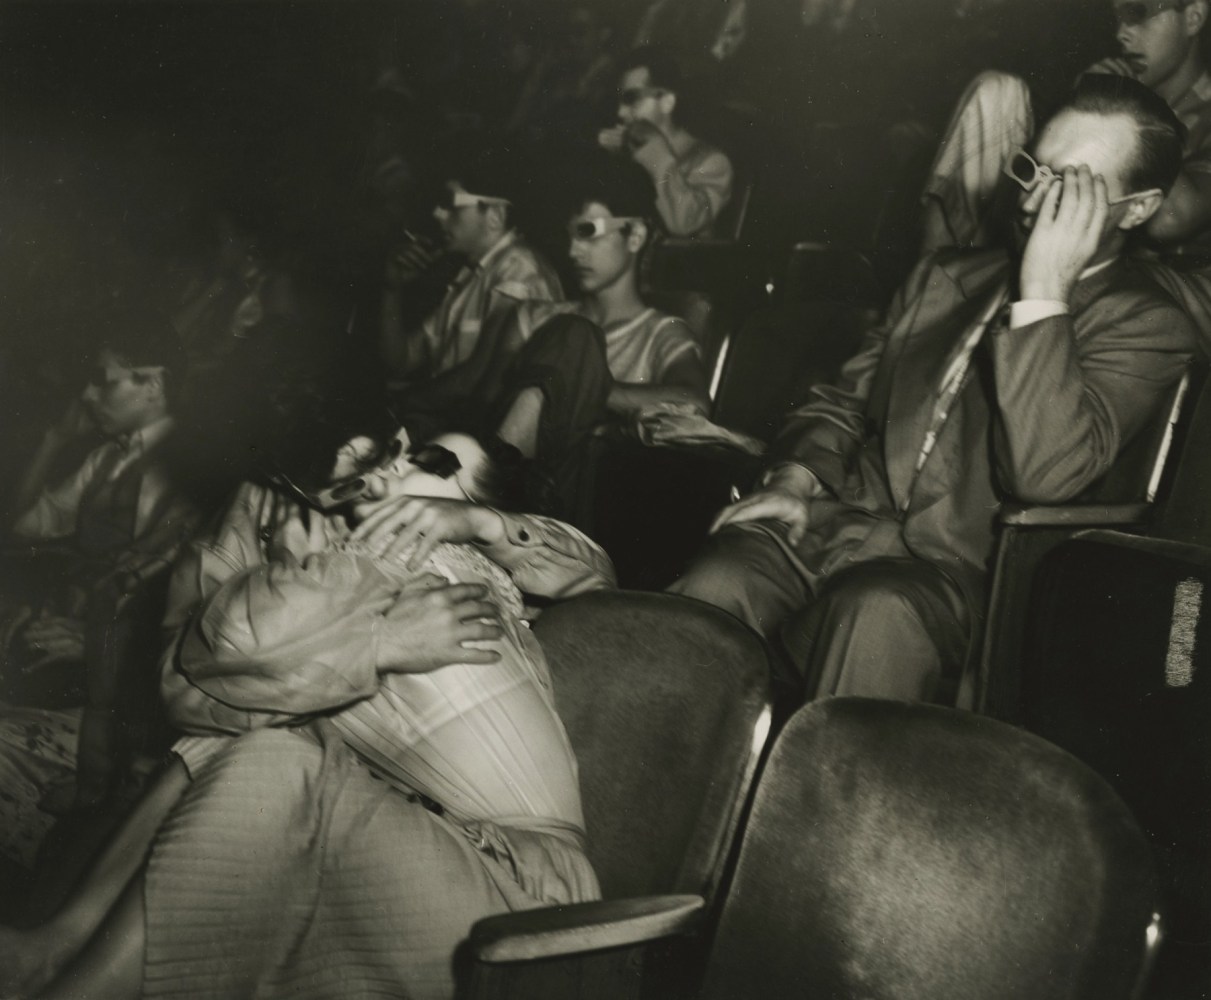 Weegee

Lovers at the Palace Theatre, 1945
gelatin silver print
image: 8 1/8 x 10 in. (20.6 x 25.4 cm)